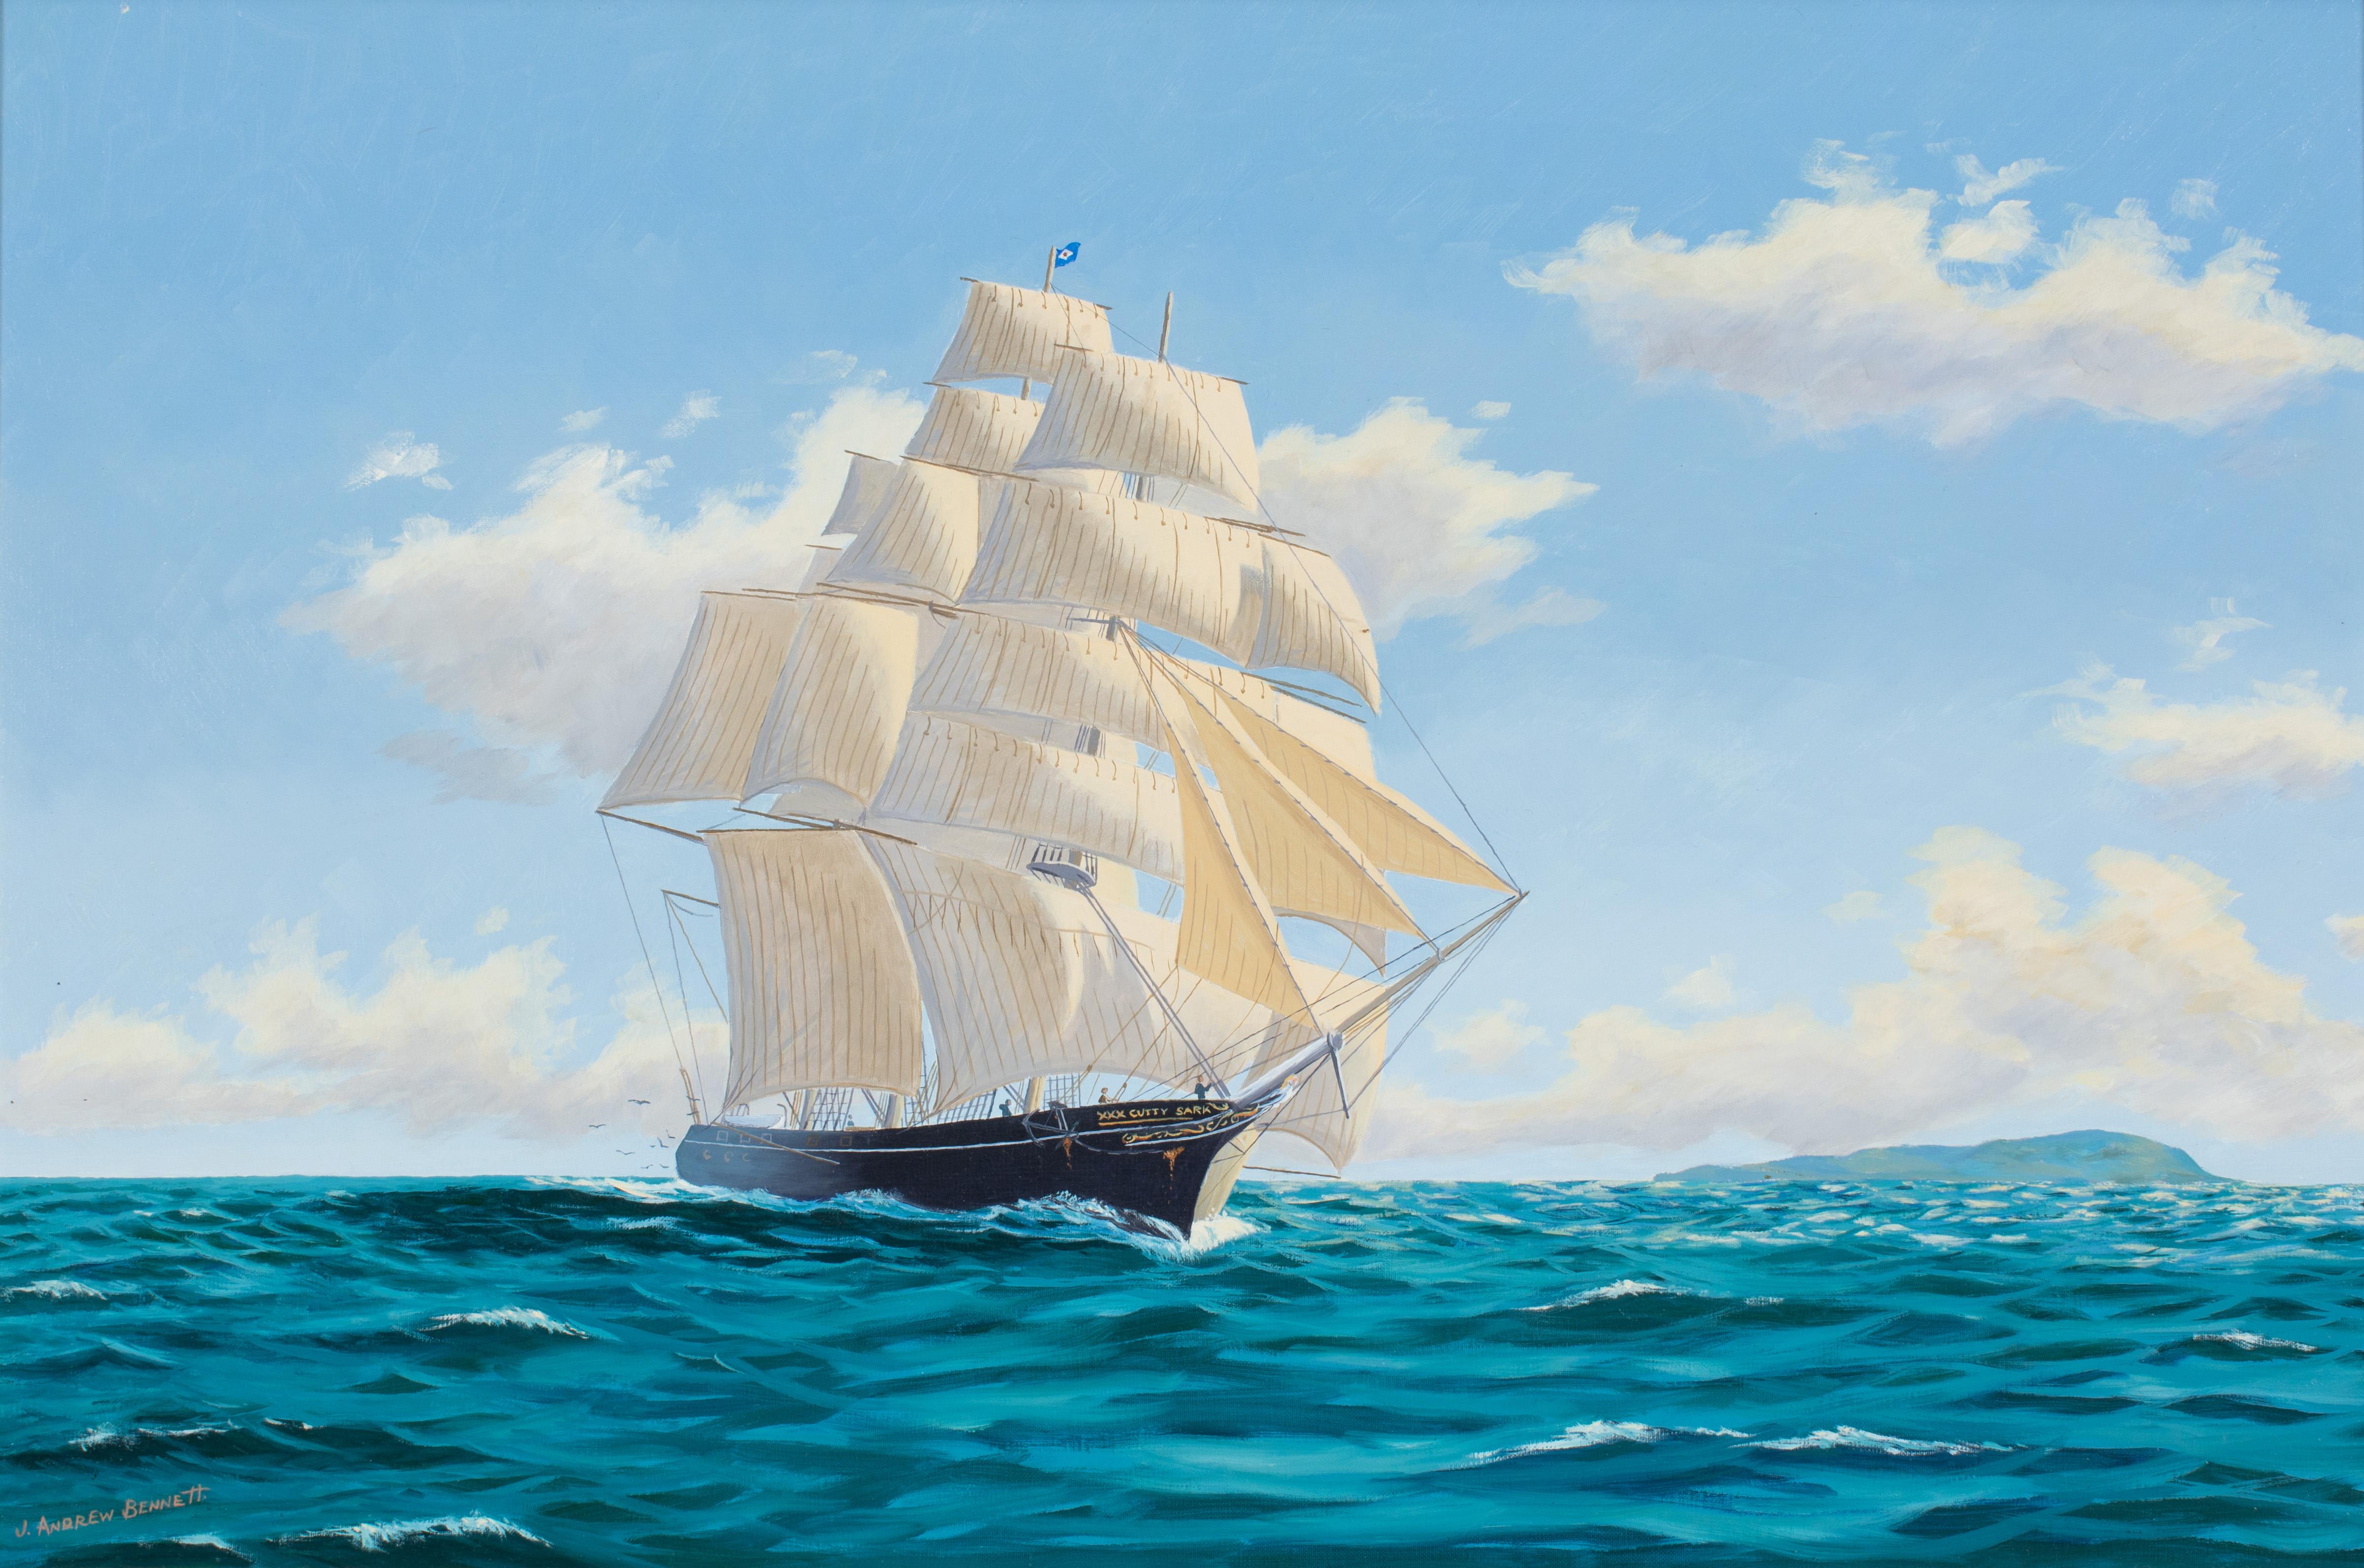 The Cutty Sark off Portland Bill - Painting by J. Andrew Bennett